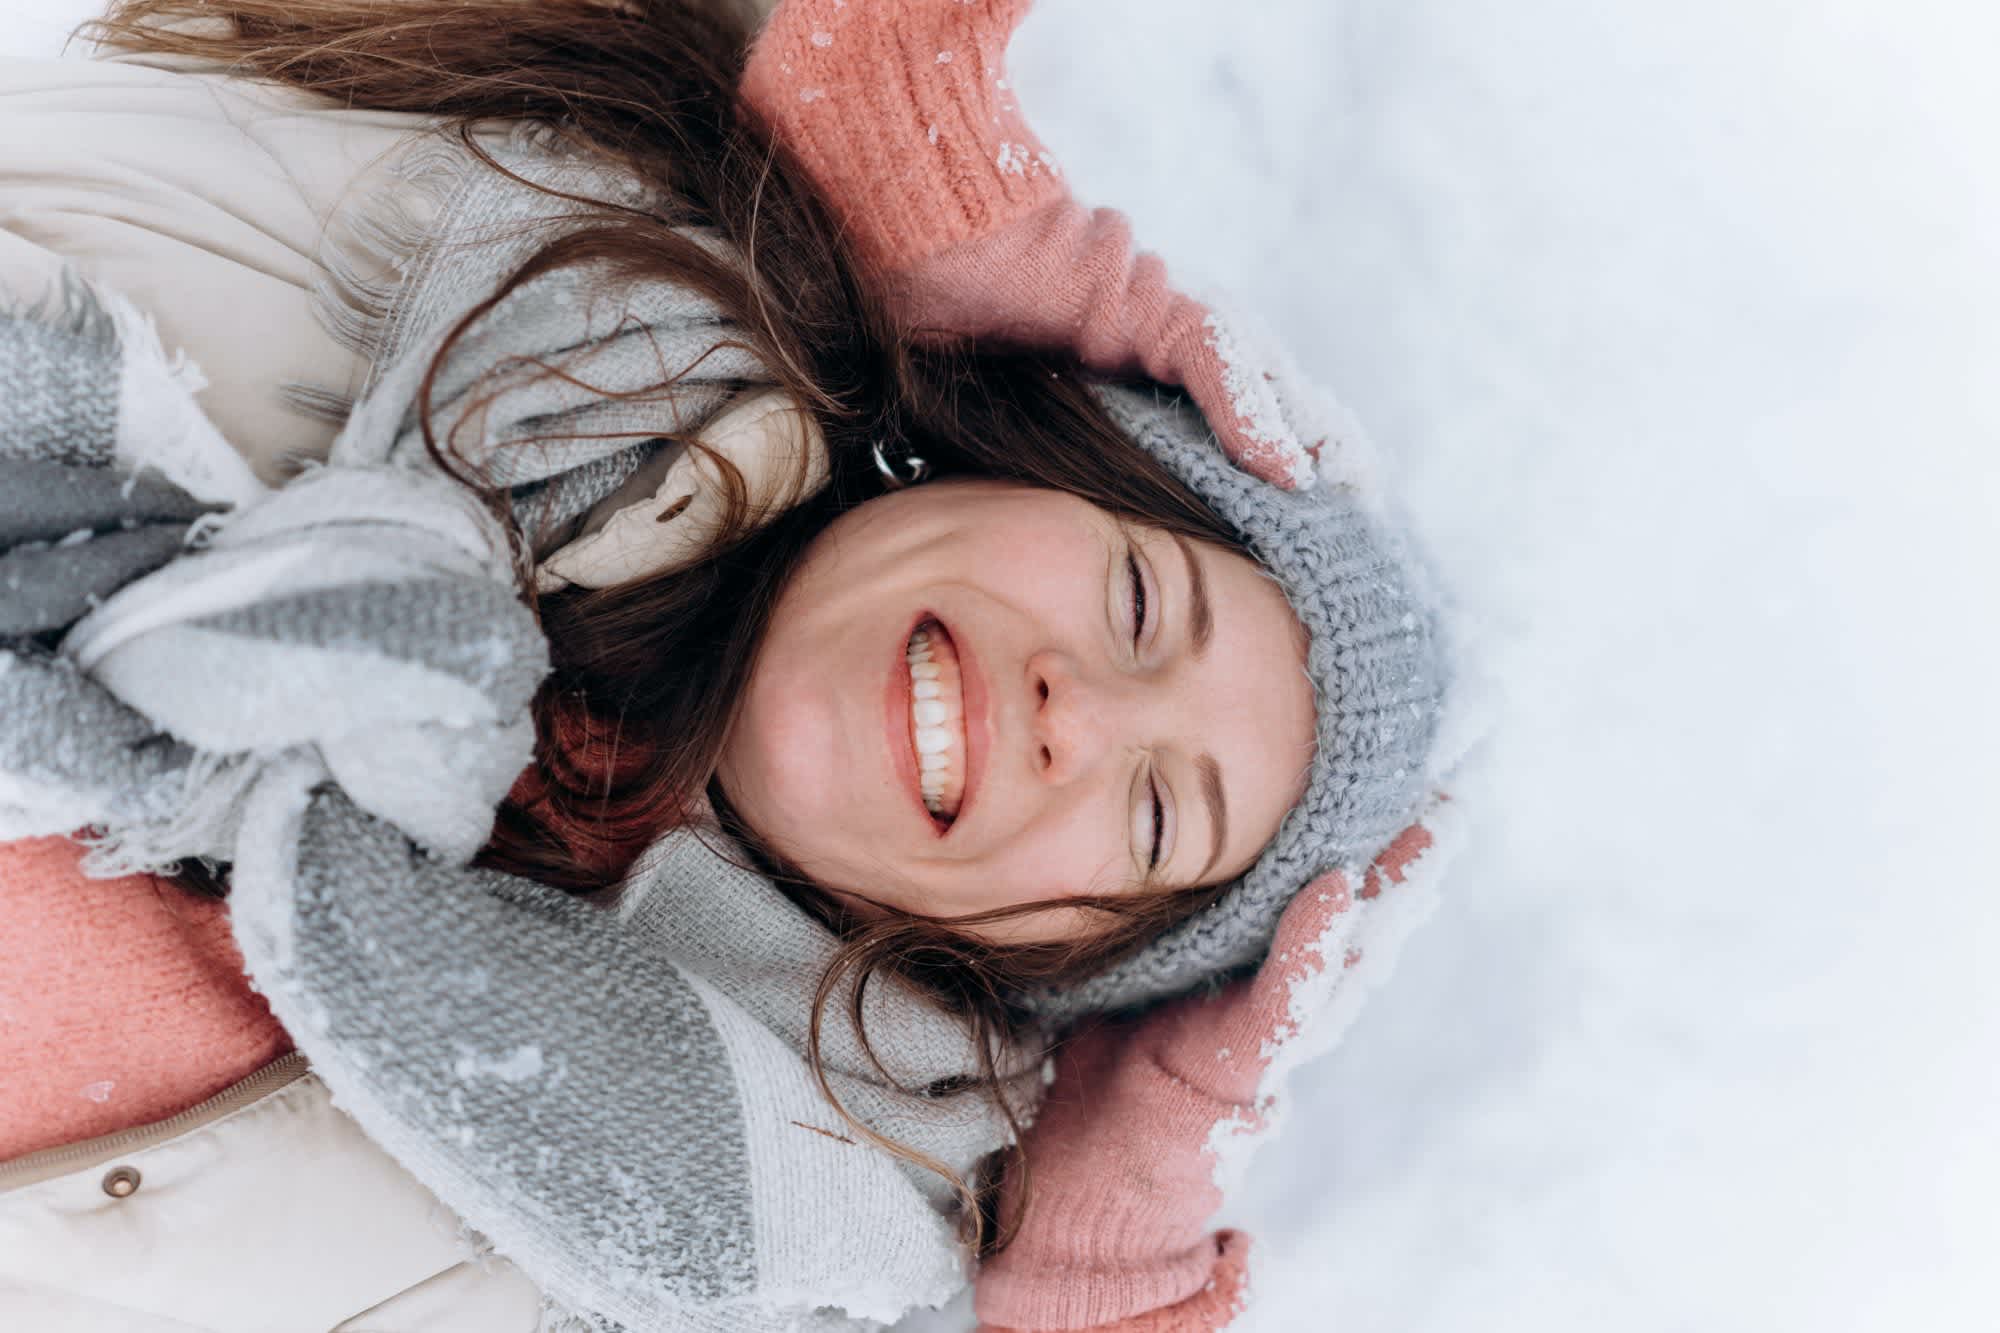 Woman lying in the snow, smiling with her hands on her head